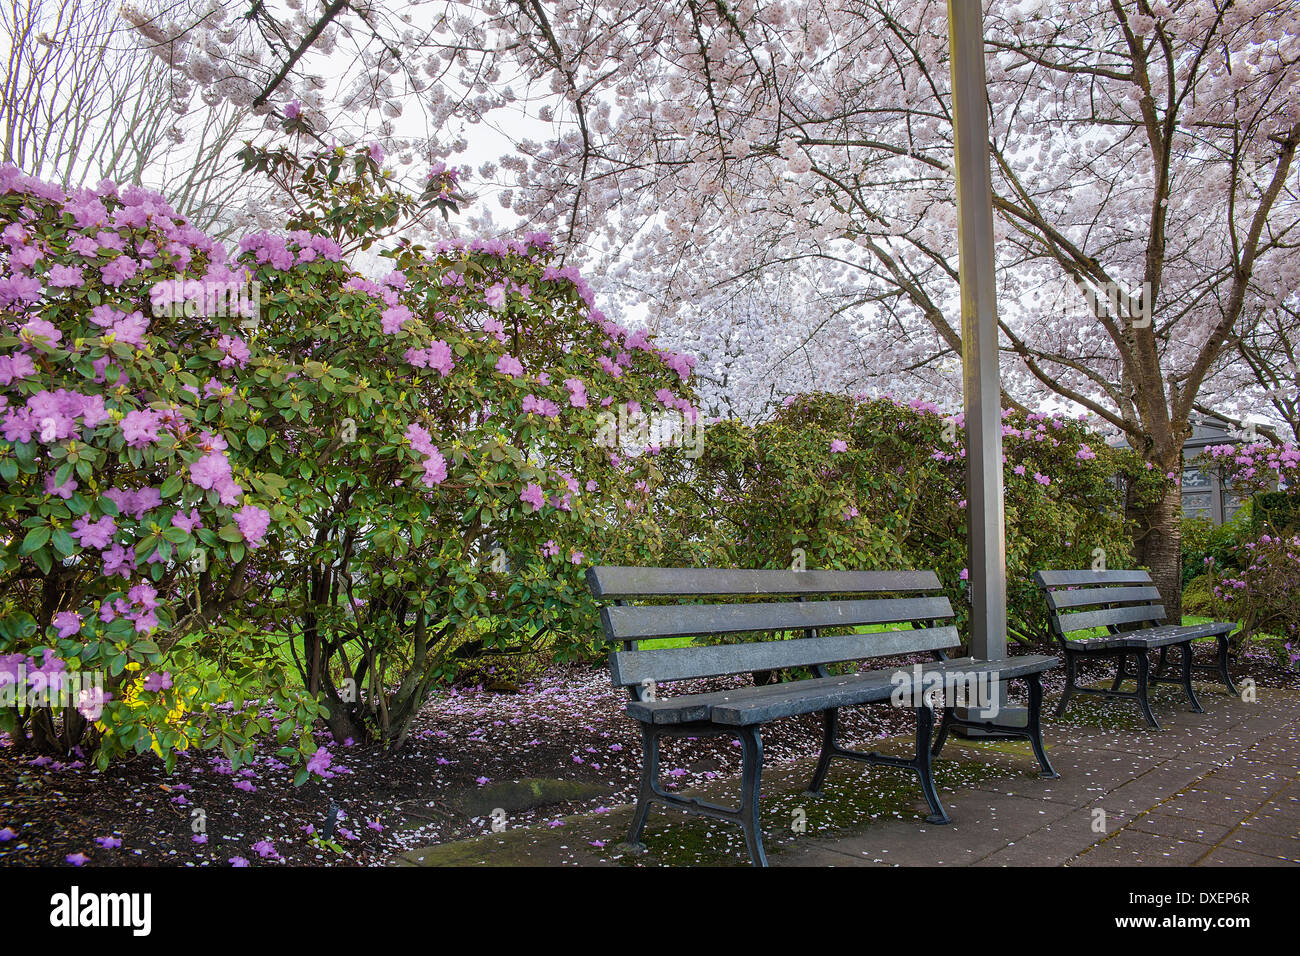 Spring Time in the Park with Blooming Cherry Blossom Trees and Azaleas by Wooden Park Benches Stock Photo